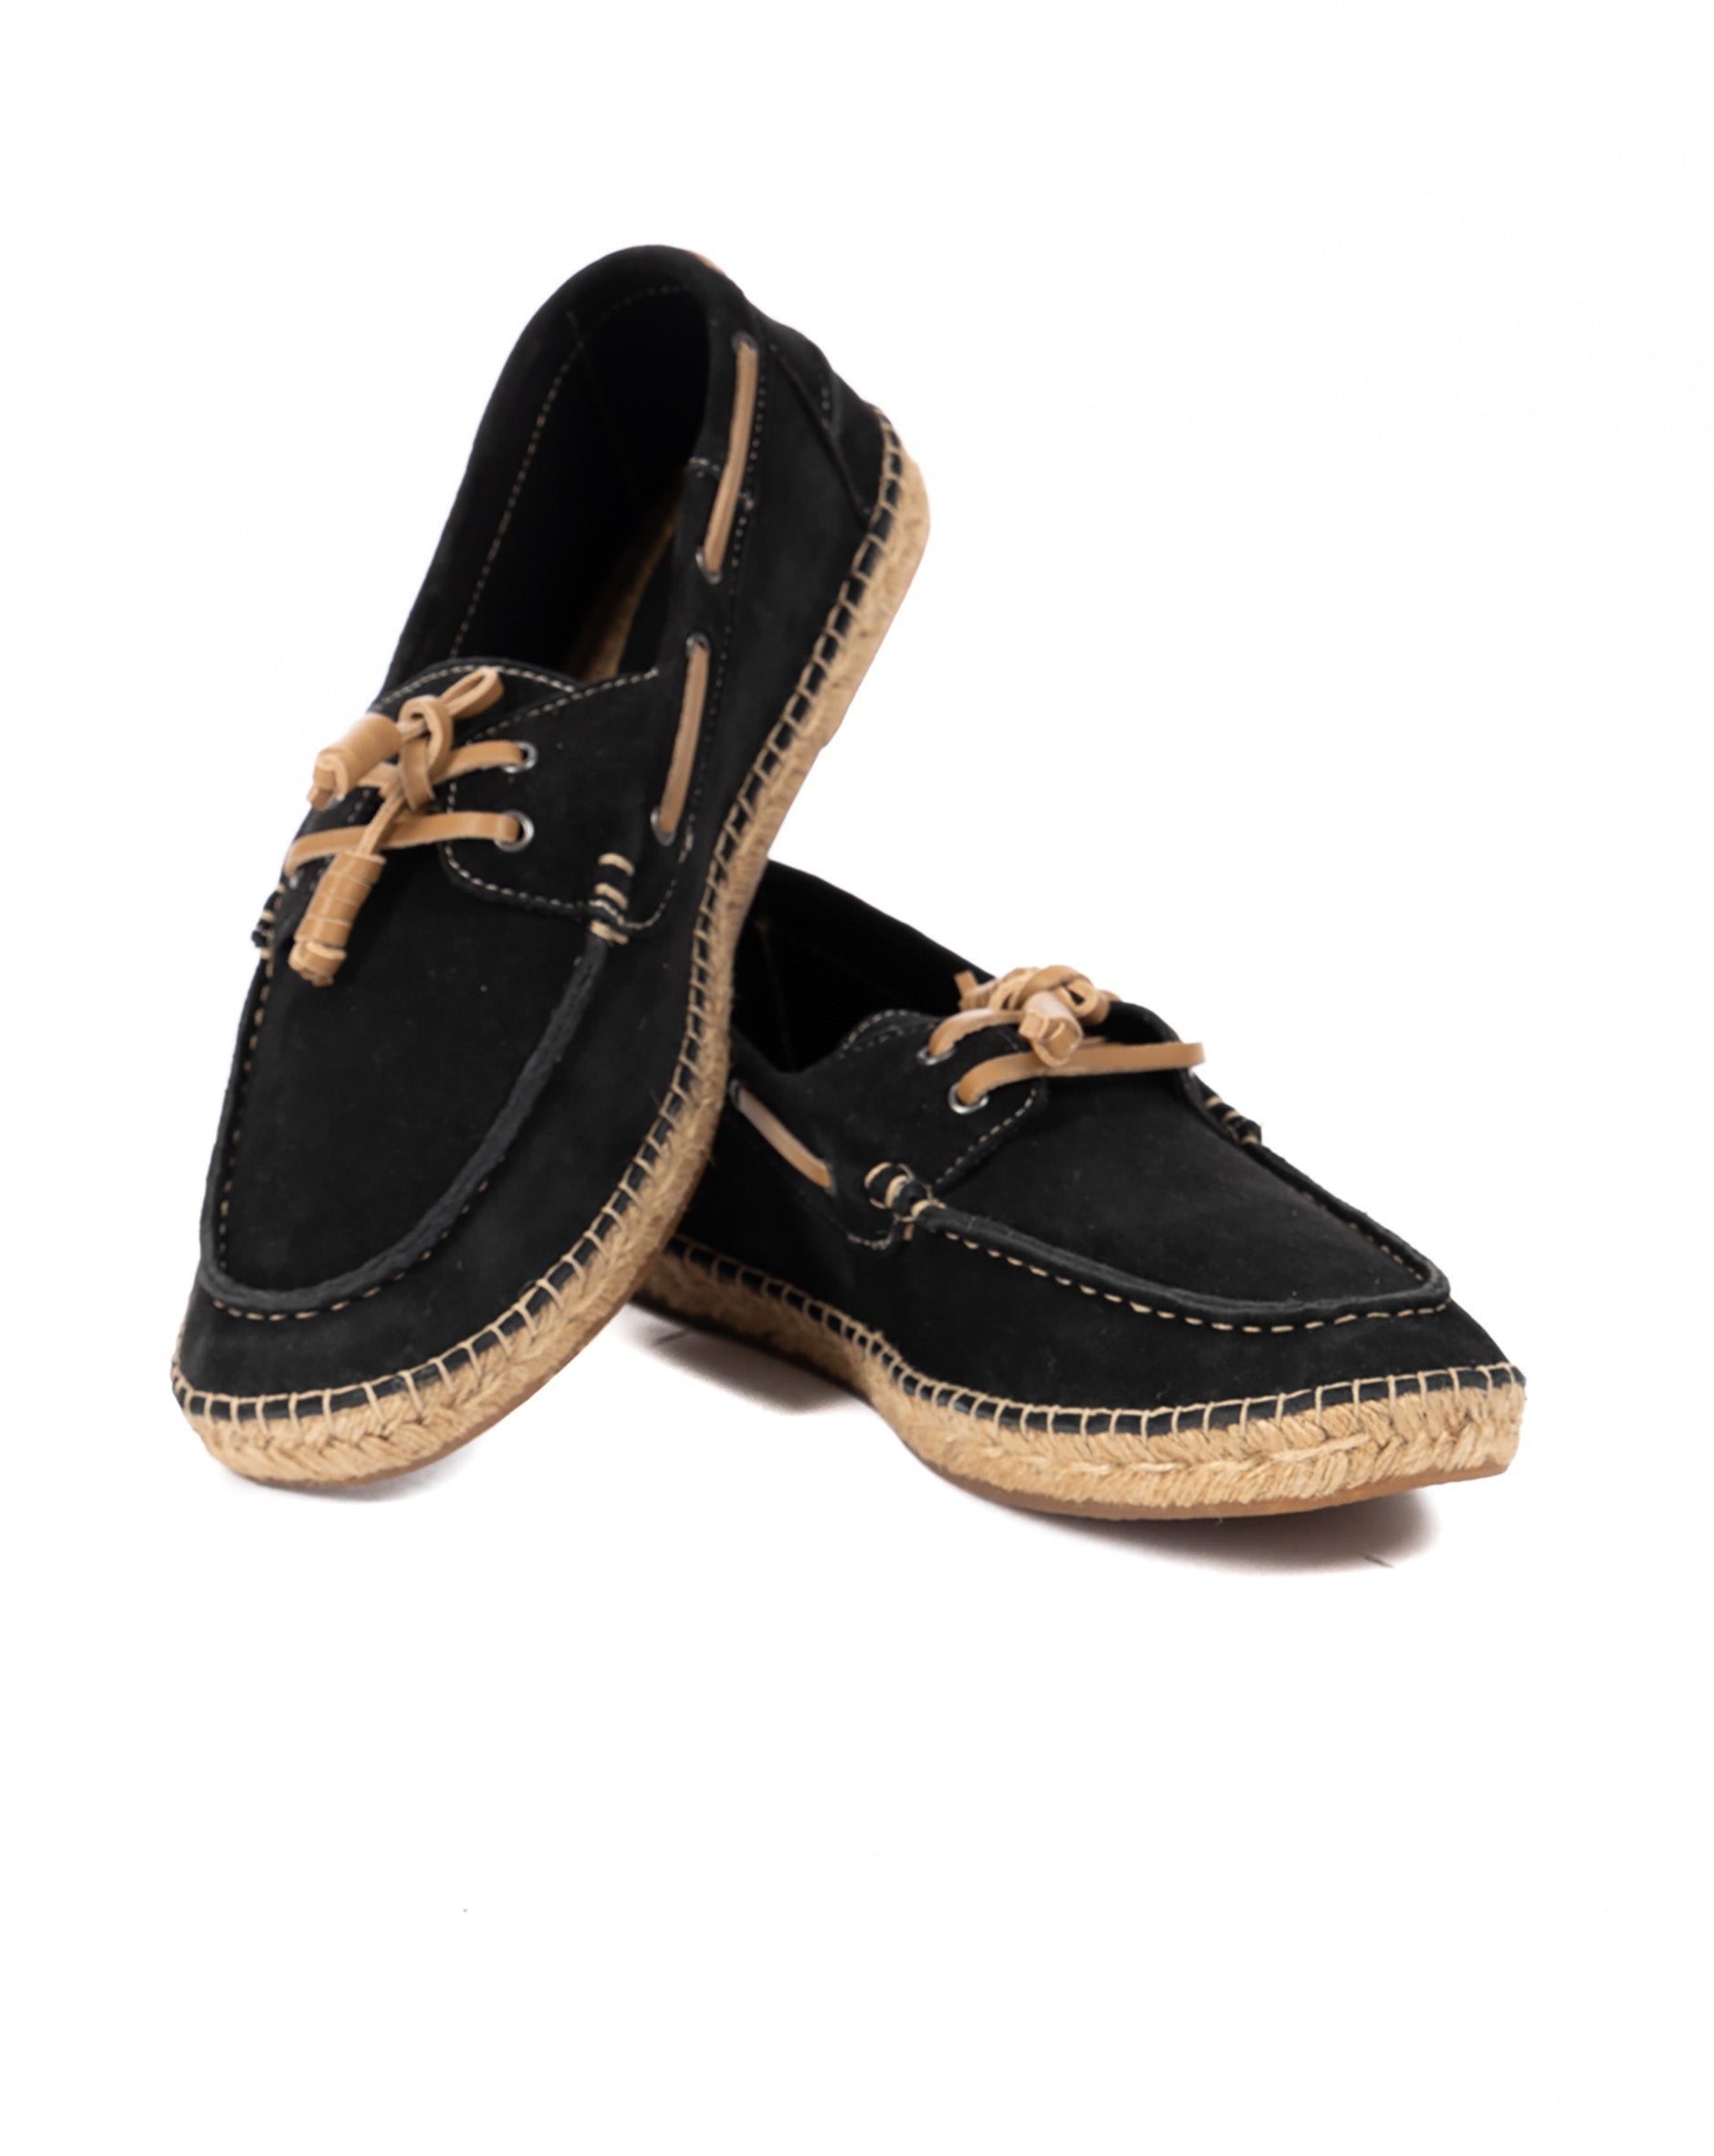 Pompeii - black suede boat with rope bottom